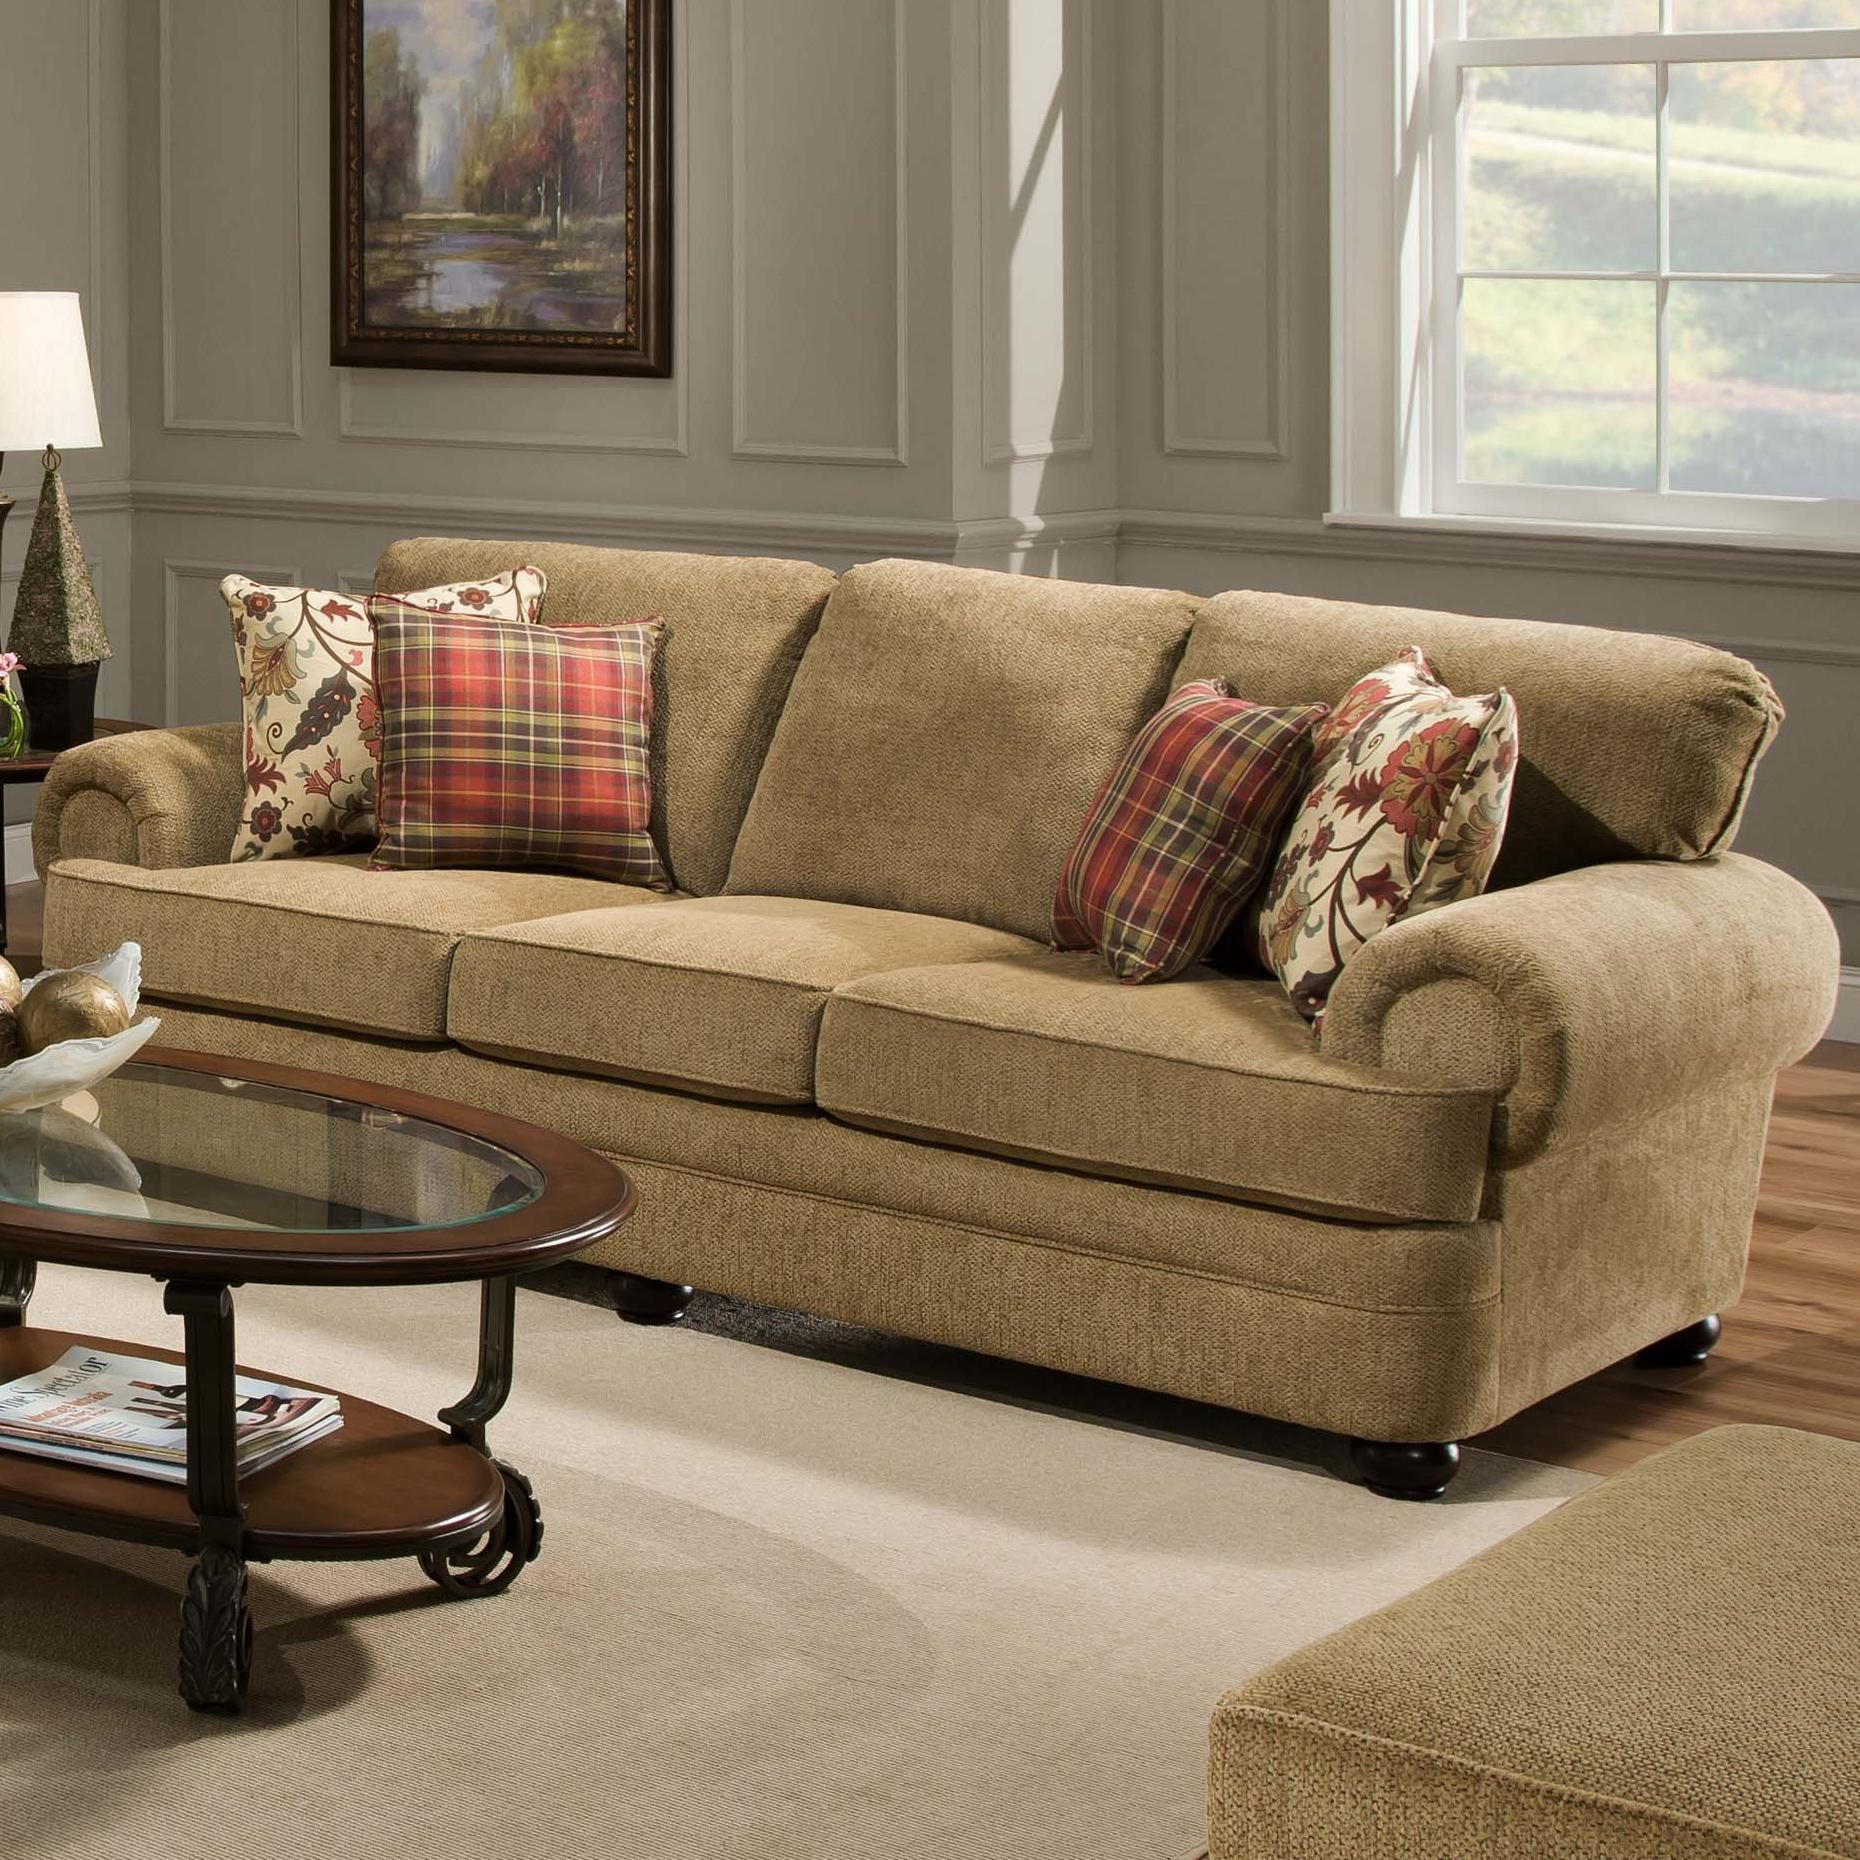 United Furniture Industries 7530 Traditional Three Seat Sofa With Within Traditional 3 Seater Sofas (View 14 of 20)